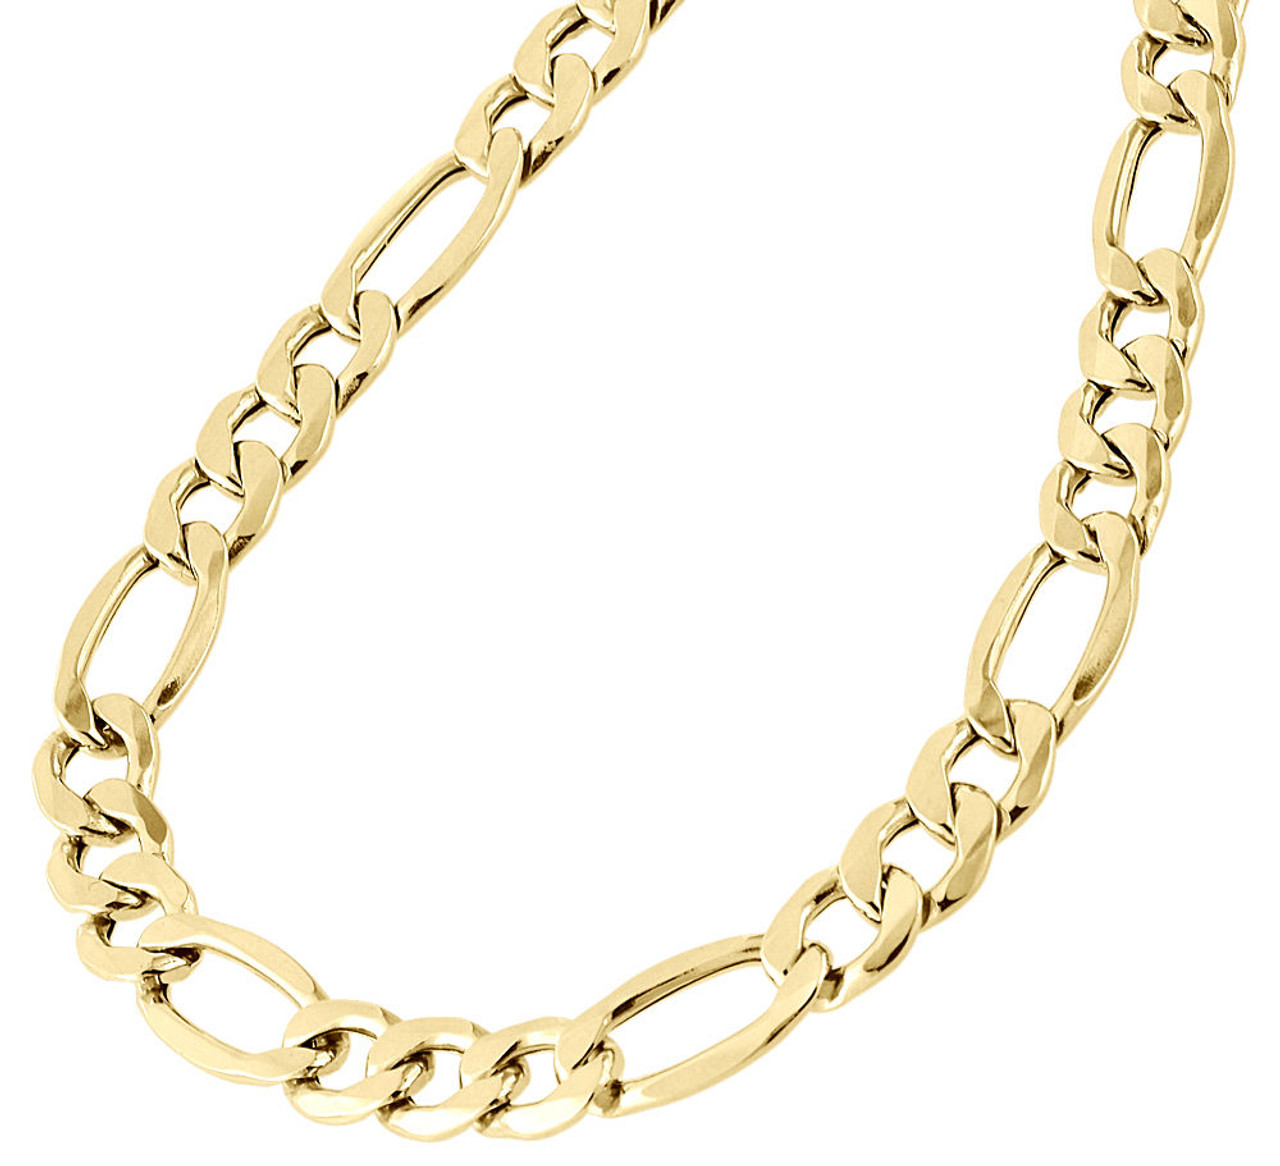 Real 10K Yellow Gold Solid Figaro Chain 8.25mm Necklace Lobster Clasp 18-30 Inches